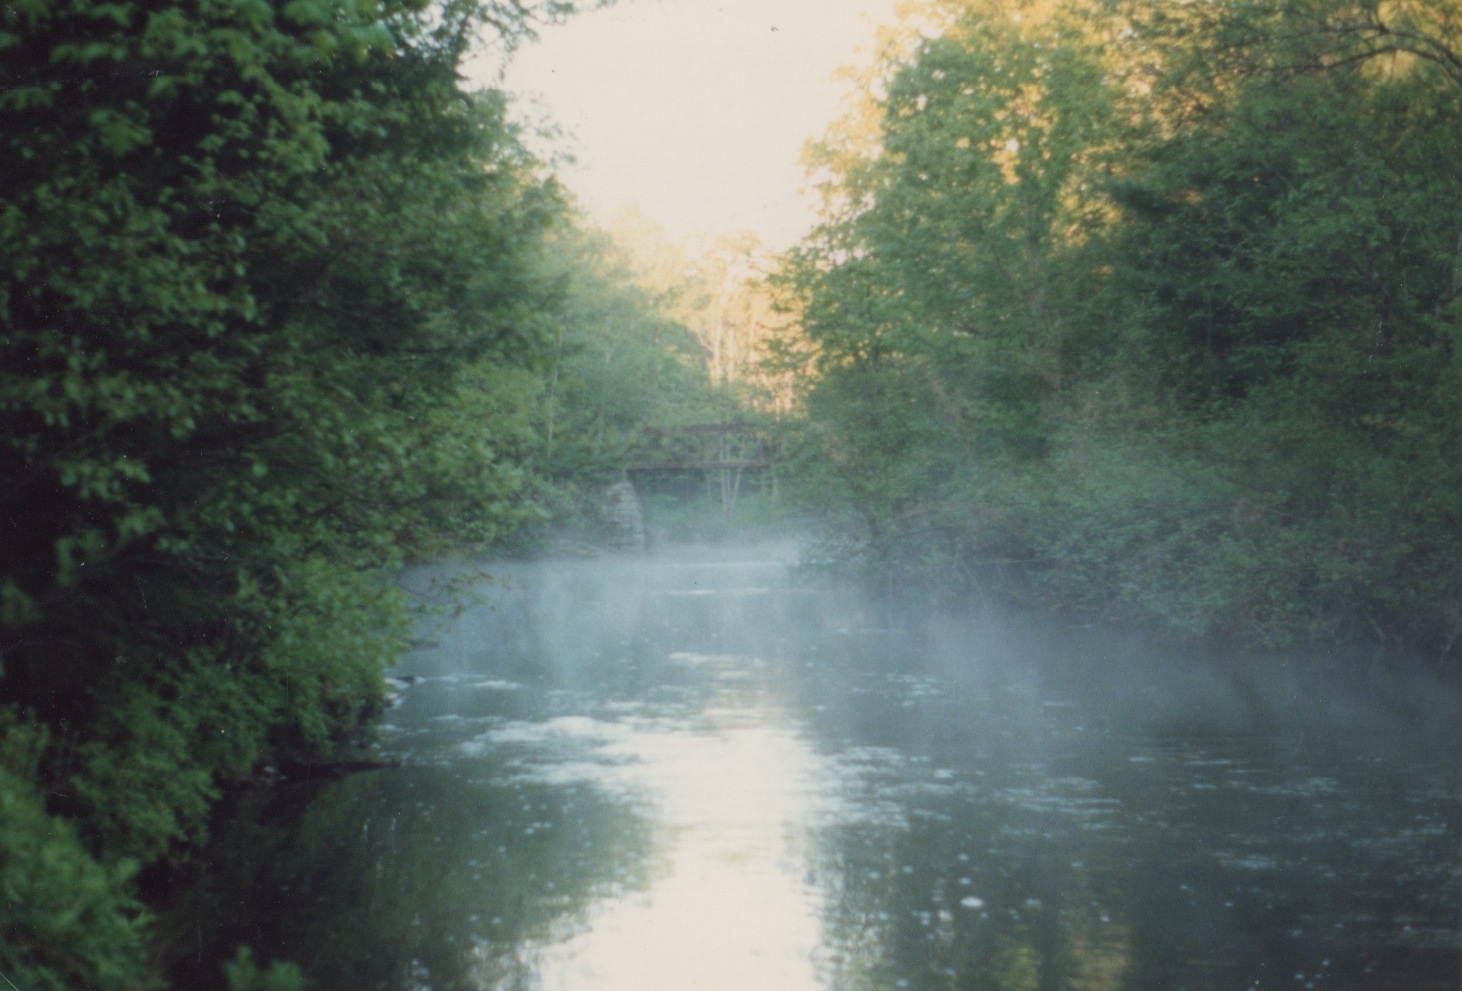  Archive photo: mist on the Little River. 